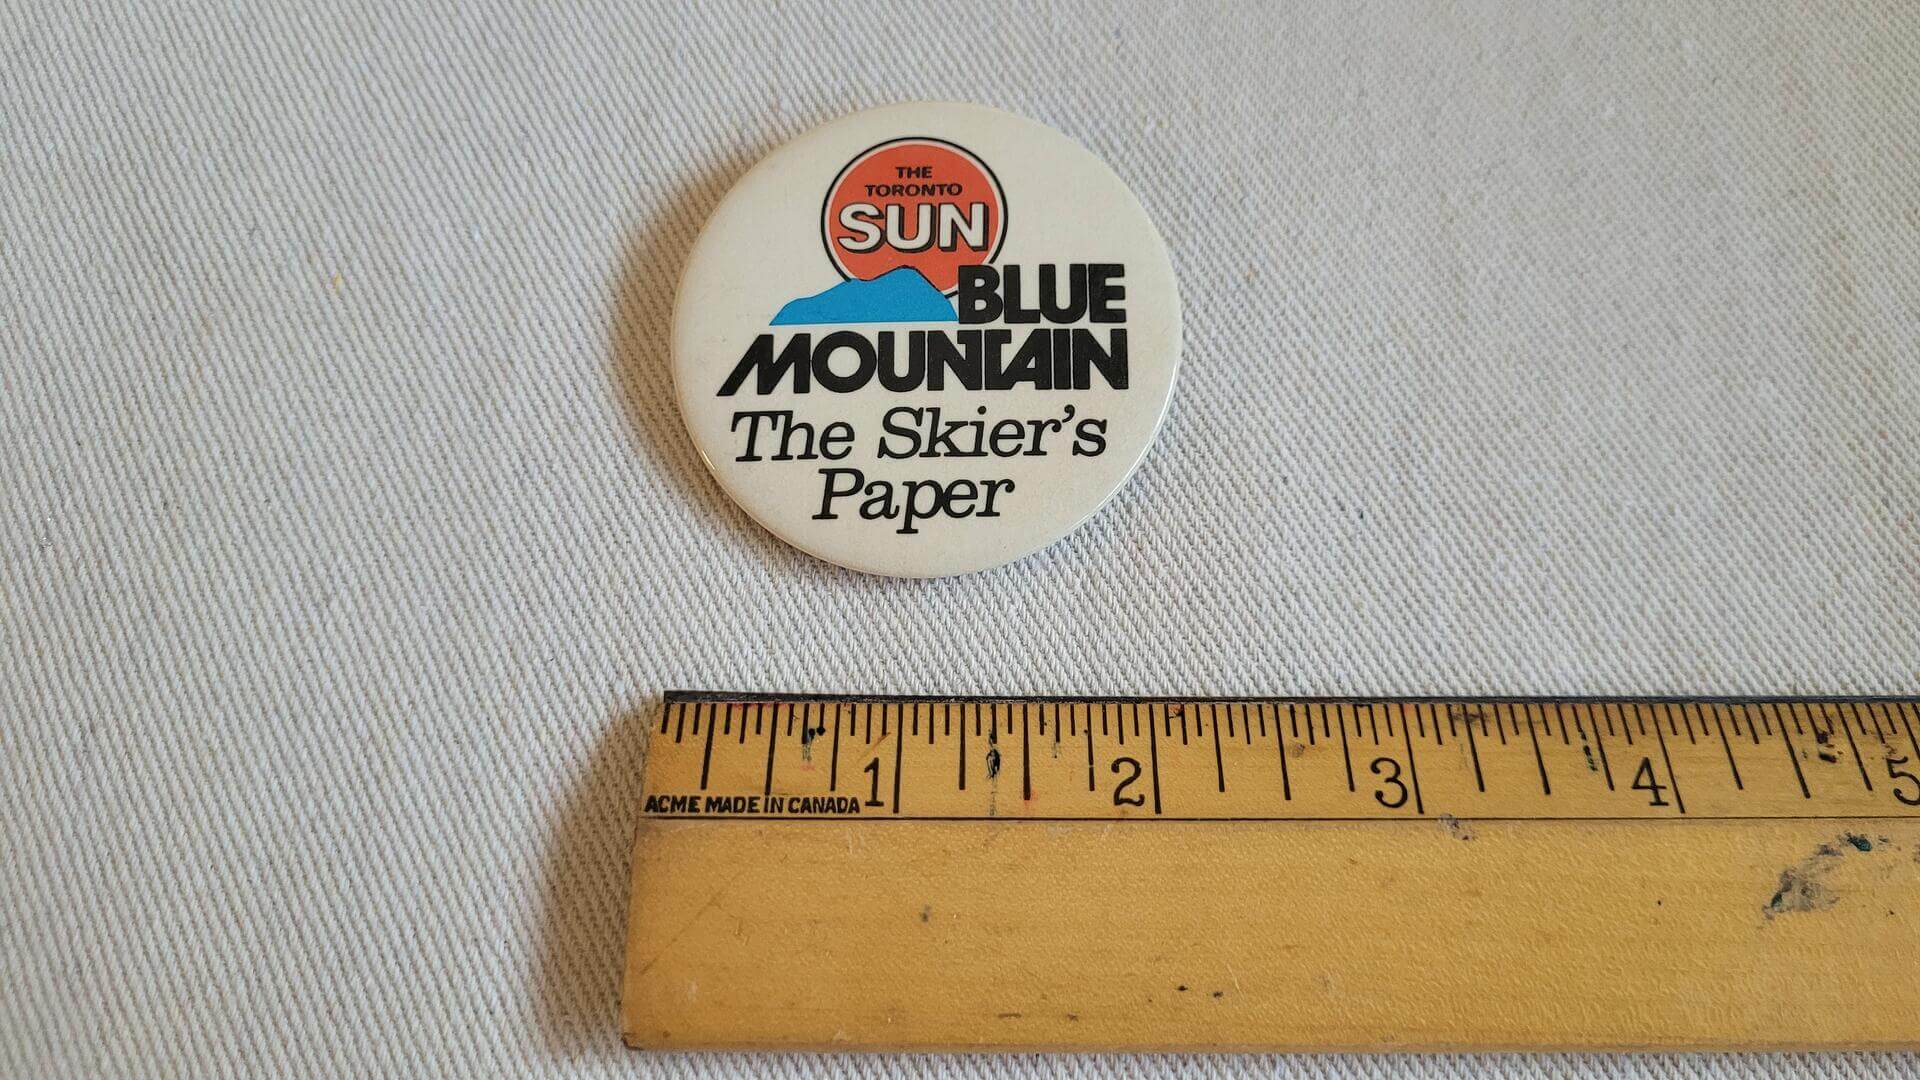 Rare vintage Toronto Sun Newspaper "The Skier's Paper" pinback button. Retro collectible badge celebrating Blue Mountian, Ontario's largest snow and four season resorts near Collingwood ON